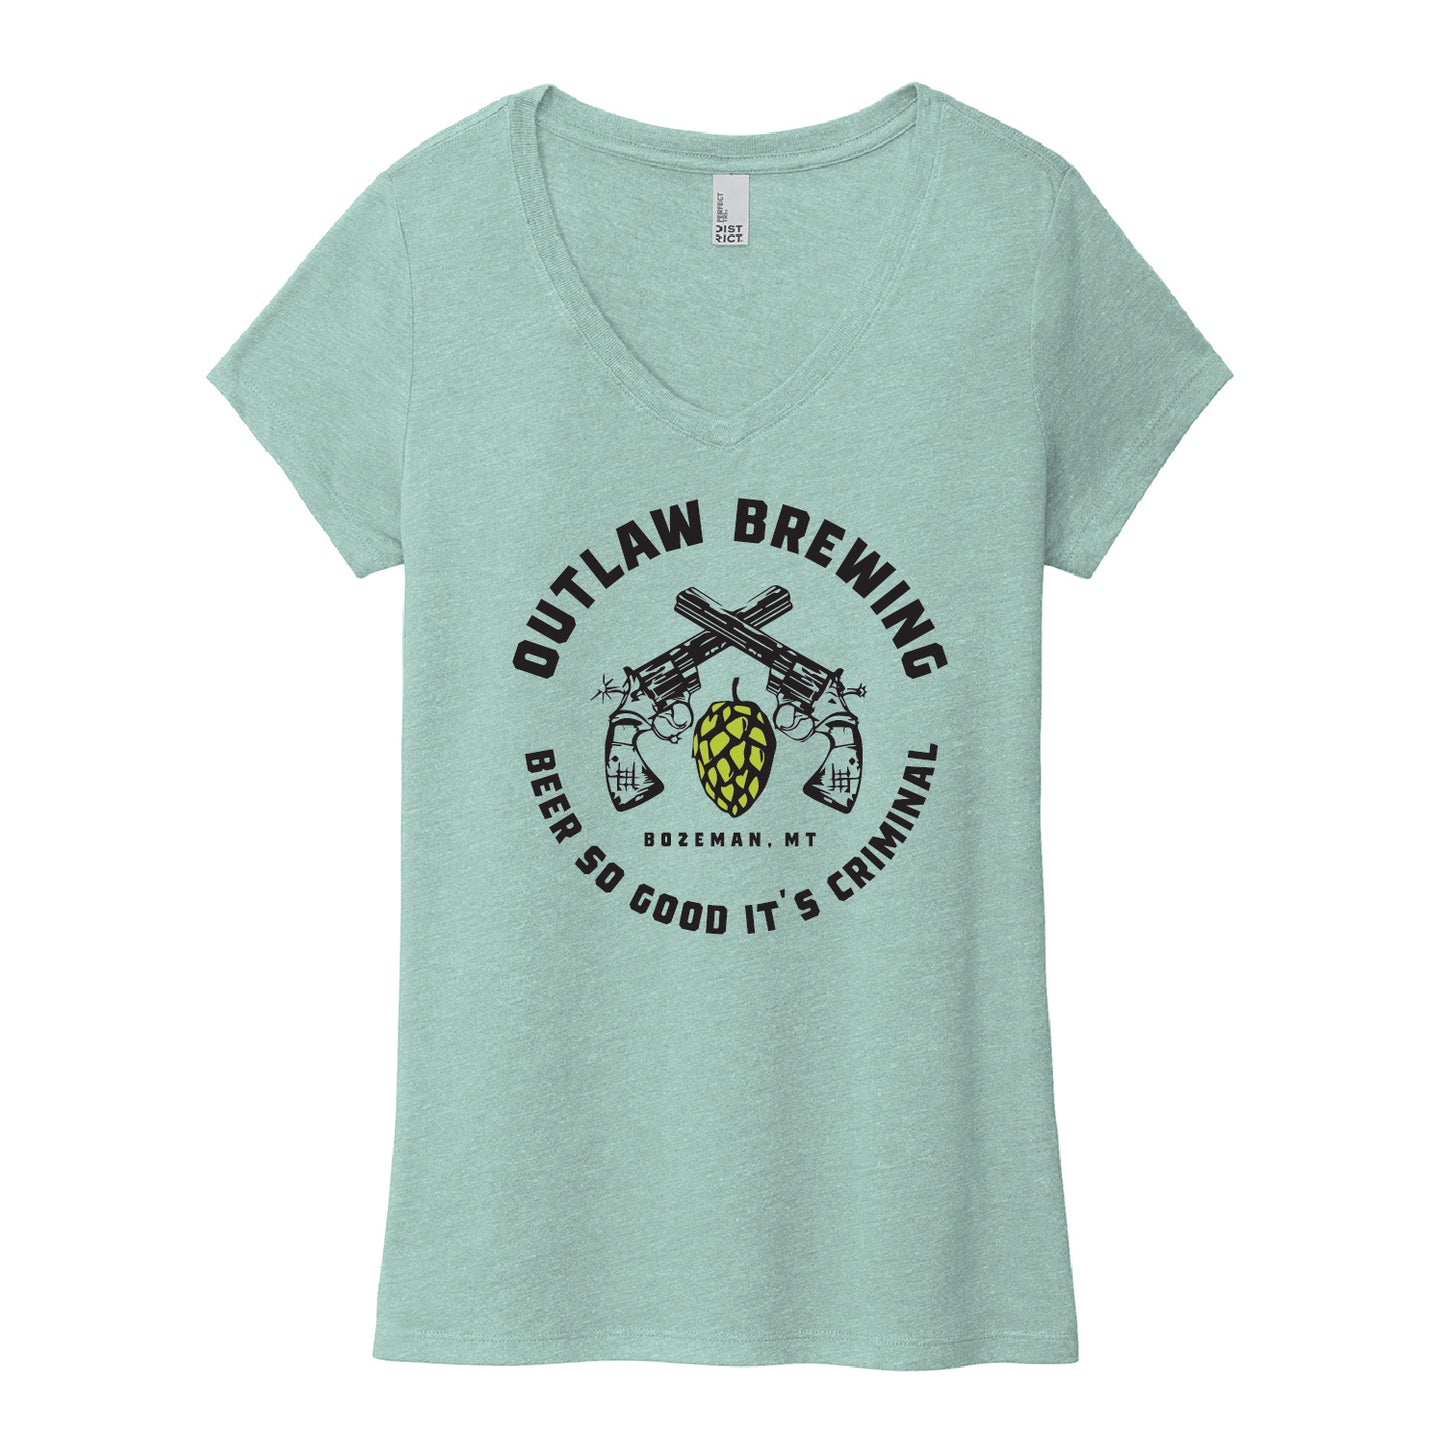 Outlaw Brewing Women’s Perfect Tri ® V-Neck Tee